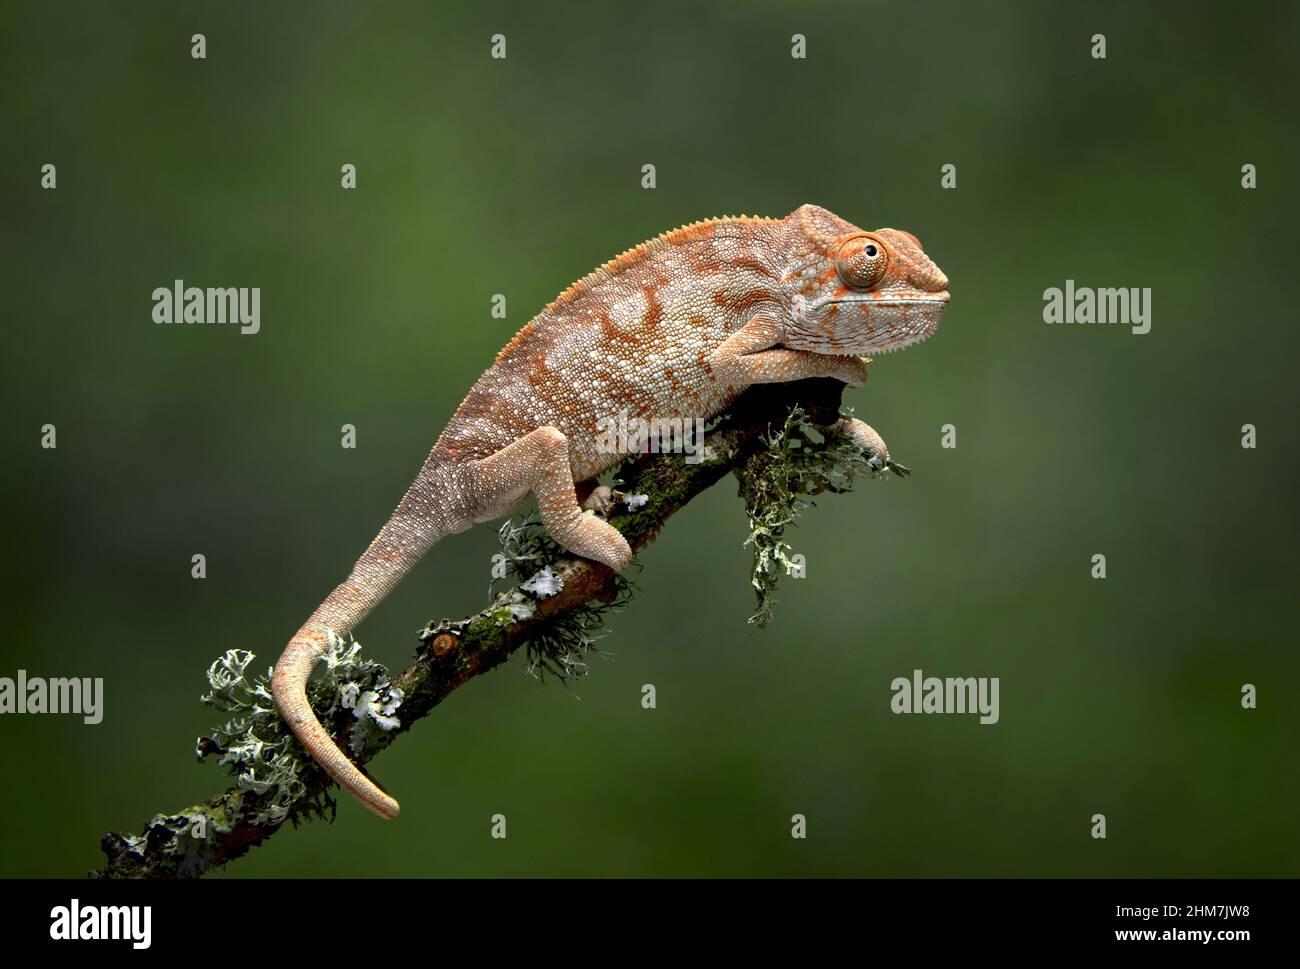 A profile portrait of a chameleon, Chamaeleonidae, as it balances on a branch using its tail as an anchor, There is a green background Stock Photo